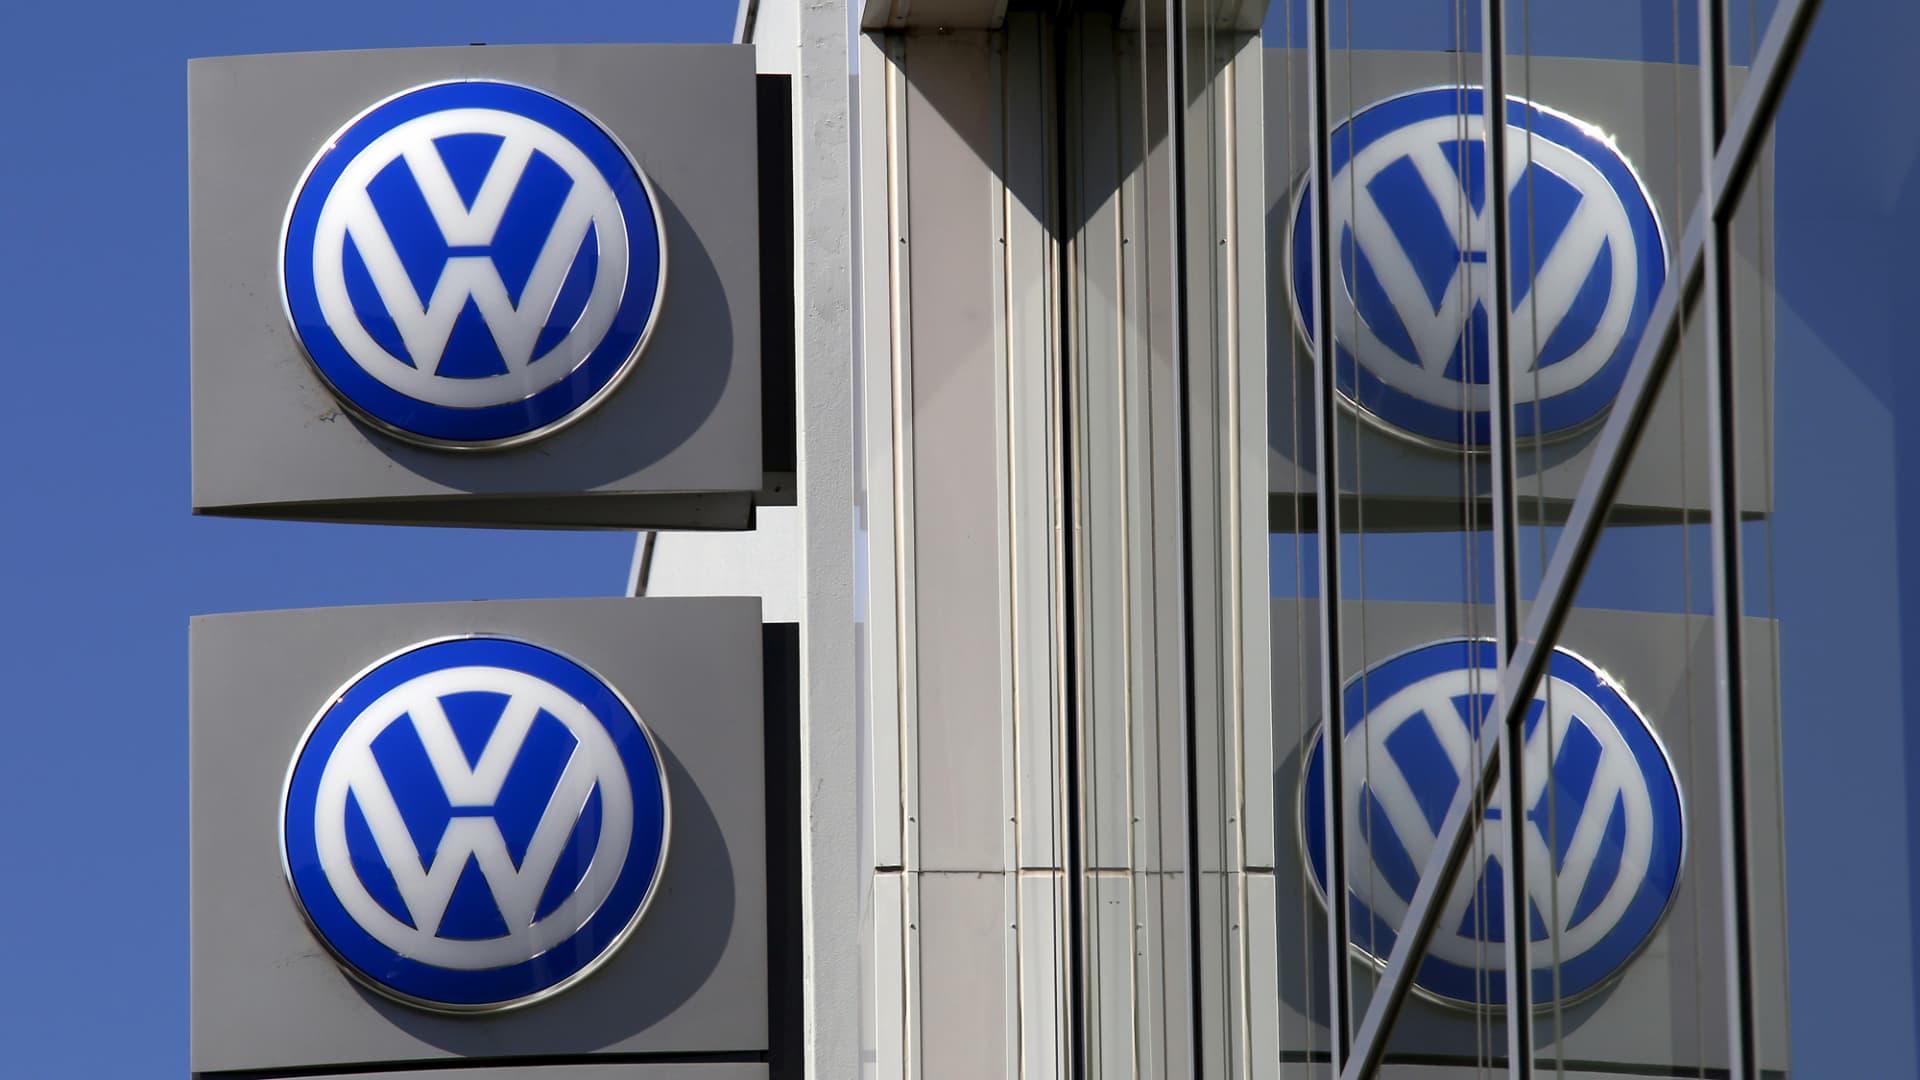 VW recalls 246,000 Atlas SUVs due to issue with airbags, brakes